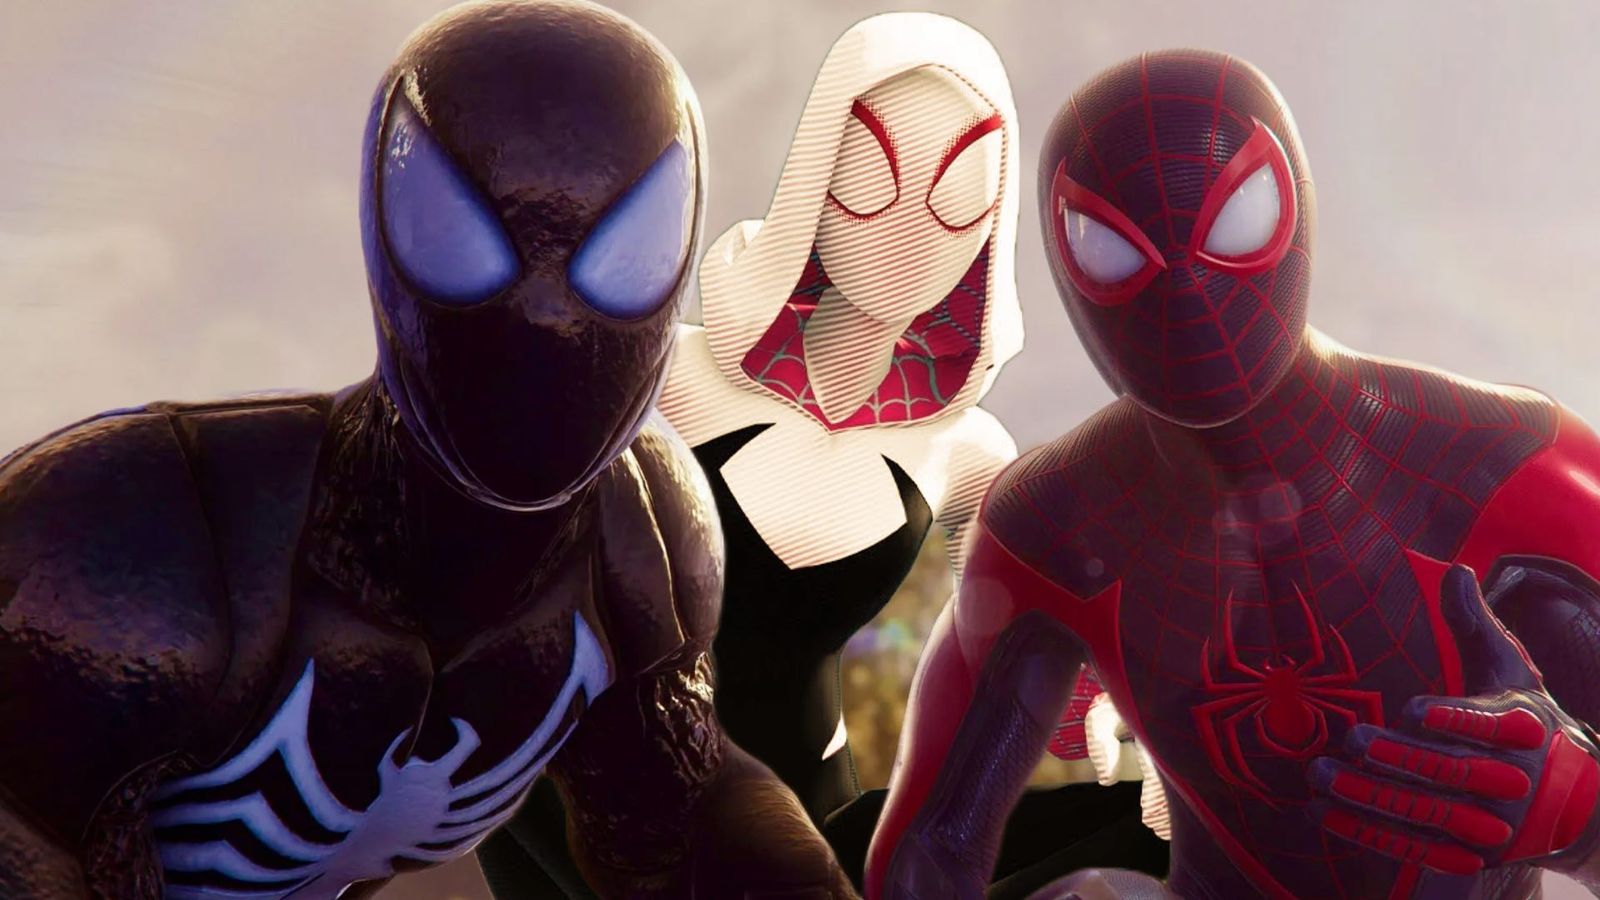 Peter Parker and Miles Morales from marvel’s Spider-Man 2 with an edited Spider-Gwen between them